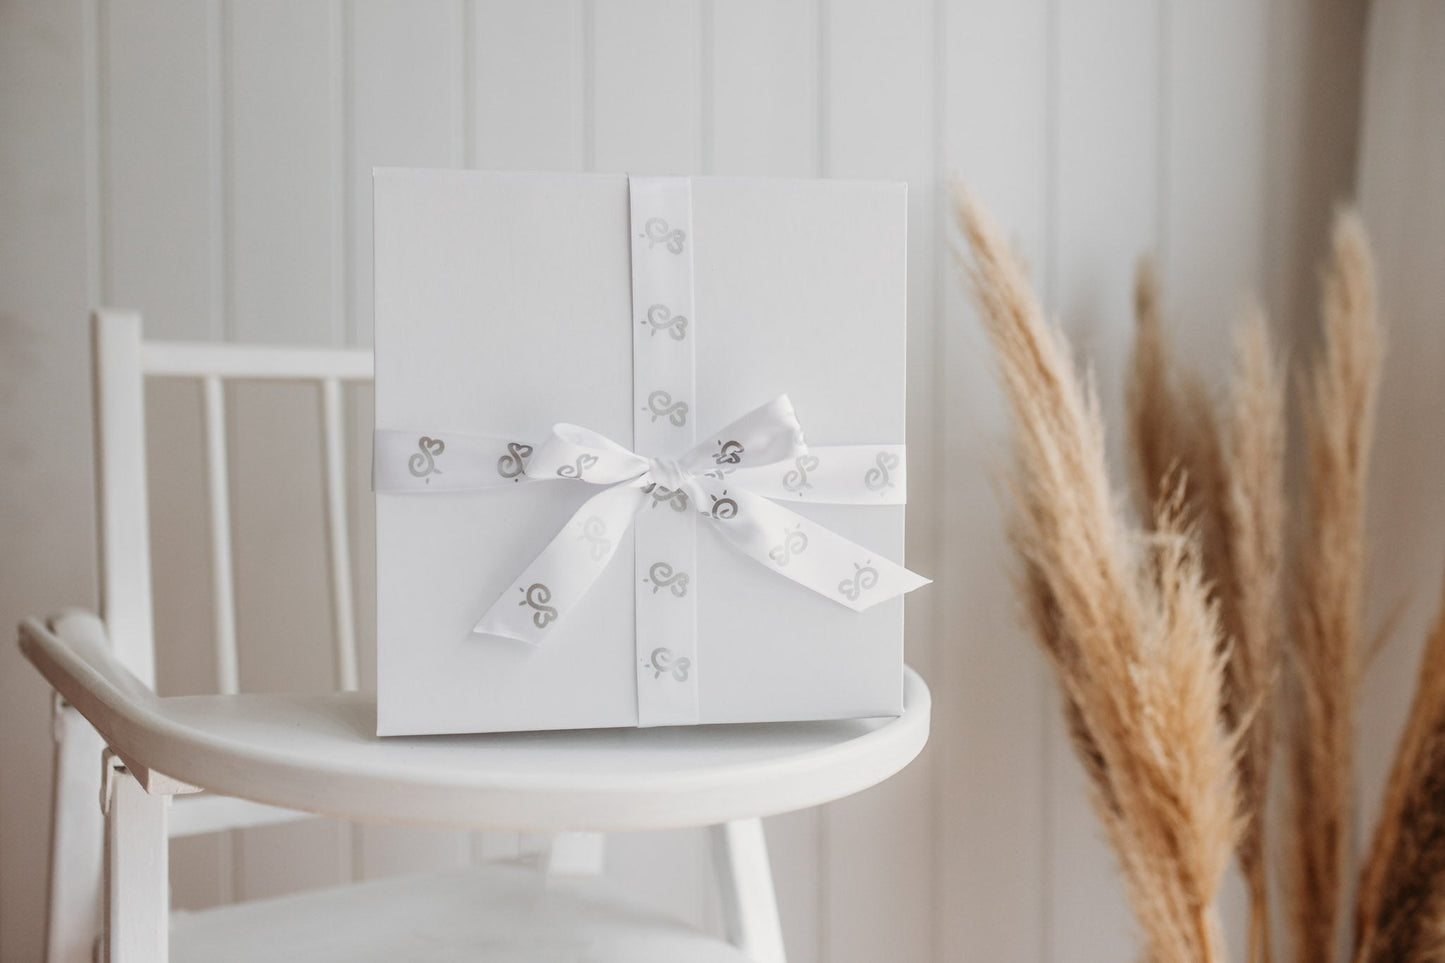 luxury white gift box with white satin branded bumbleberry park ribbon with a silver bee design placed on top of a child's high chair in a baby's nursery